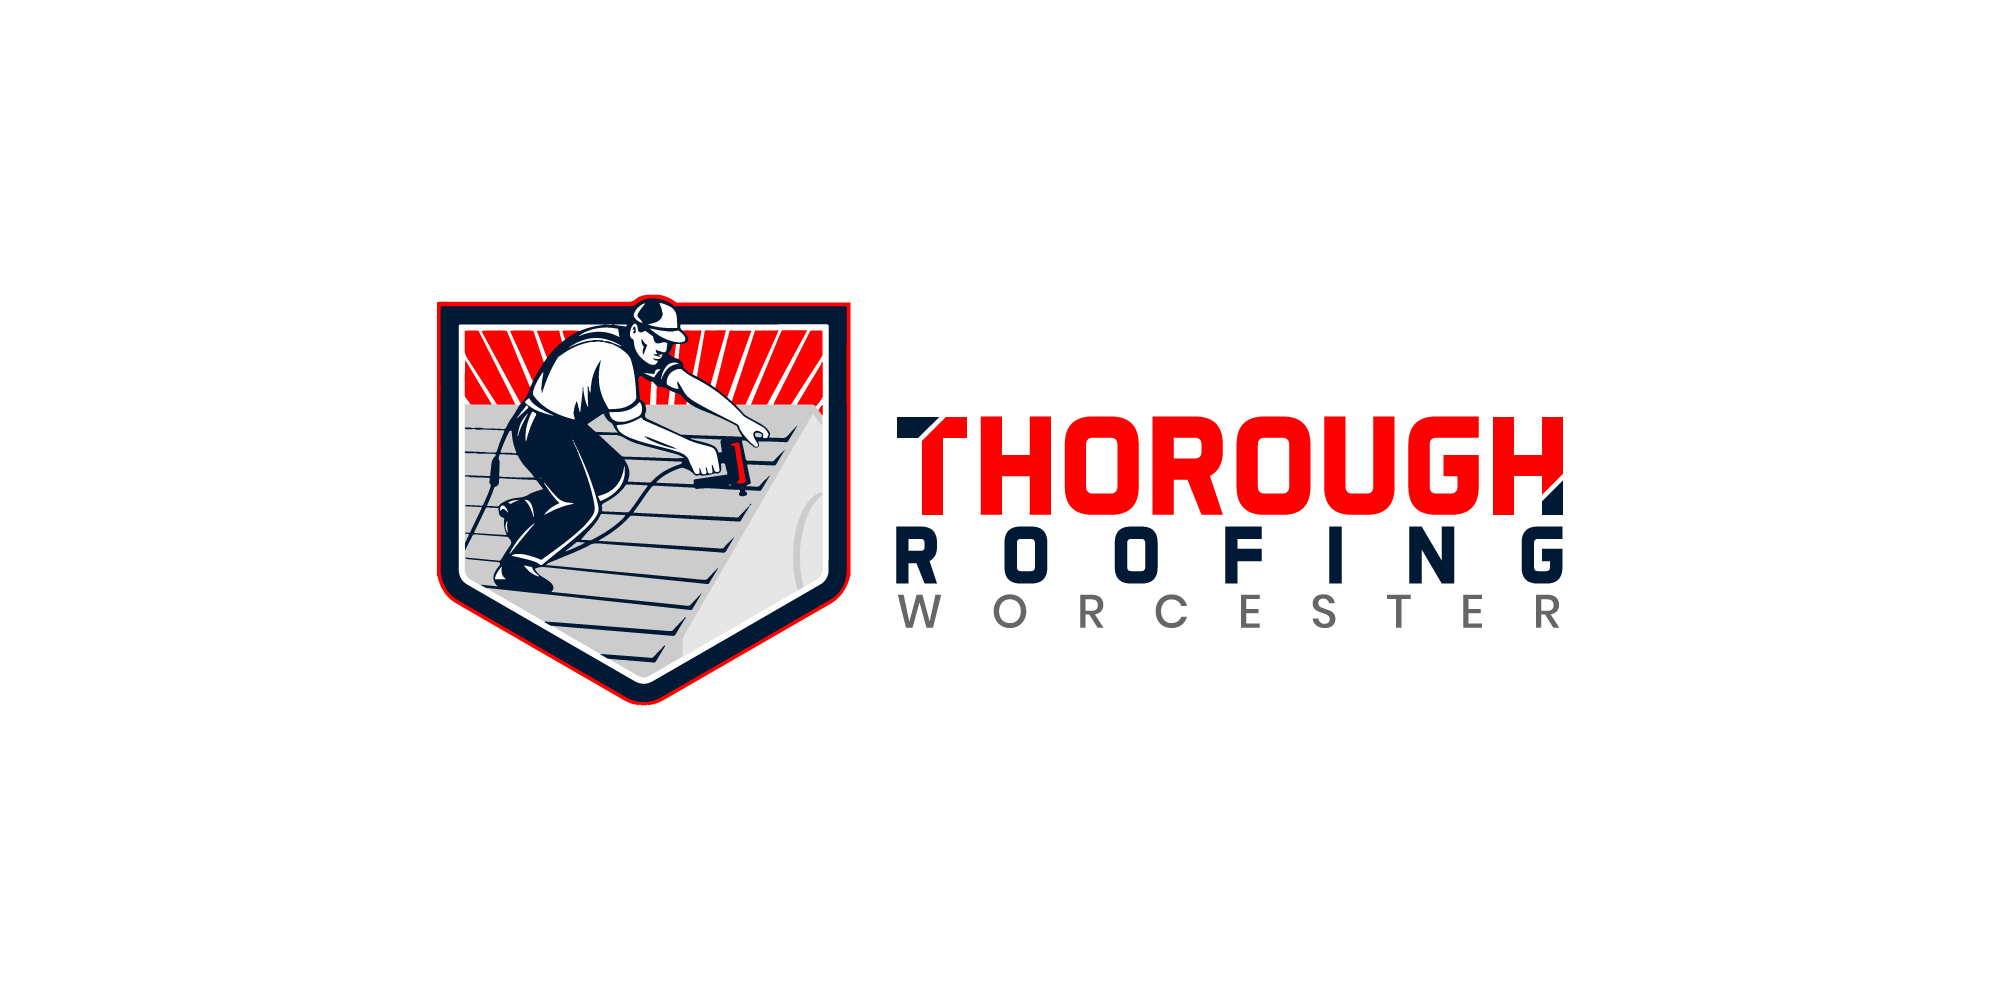 Thorough Roofing Worcester Logo